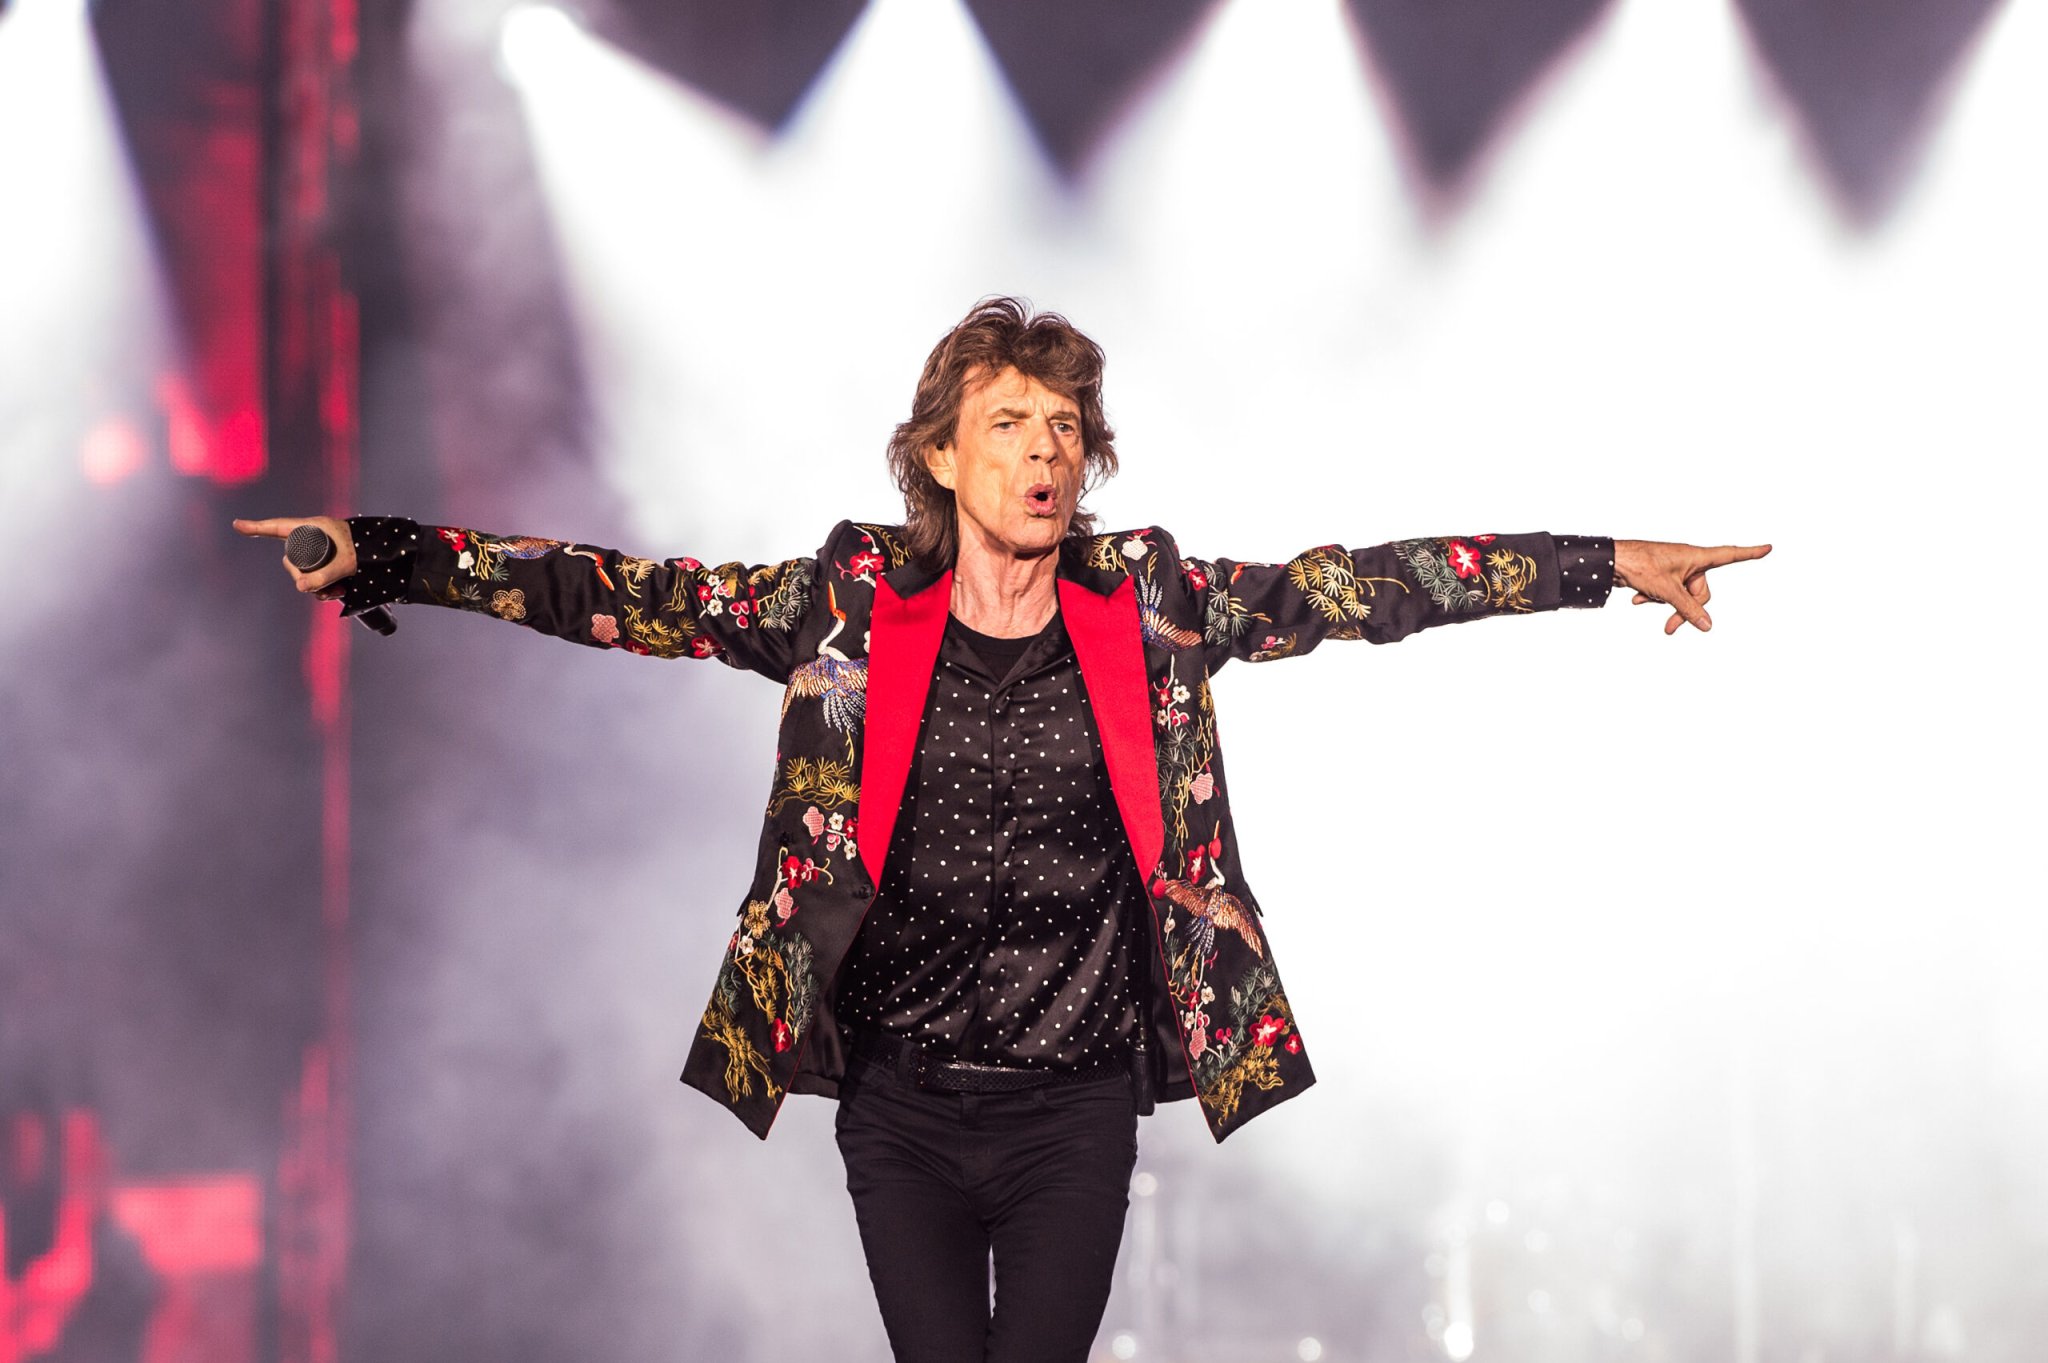 Mick Jagger Is a Fan of Machine Gun Kelly and Yungblud